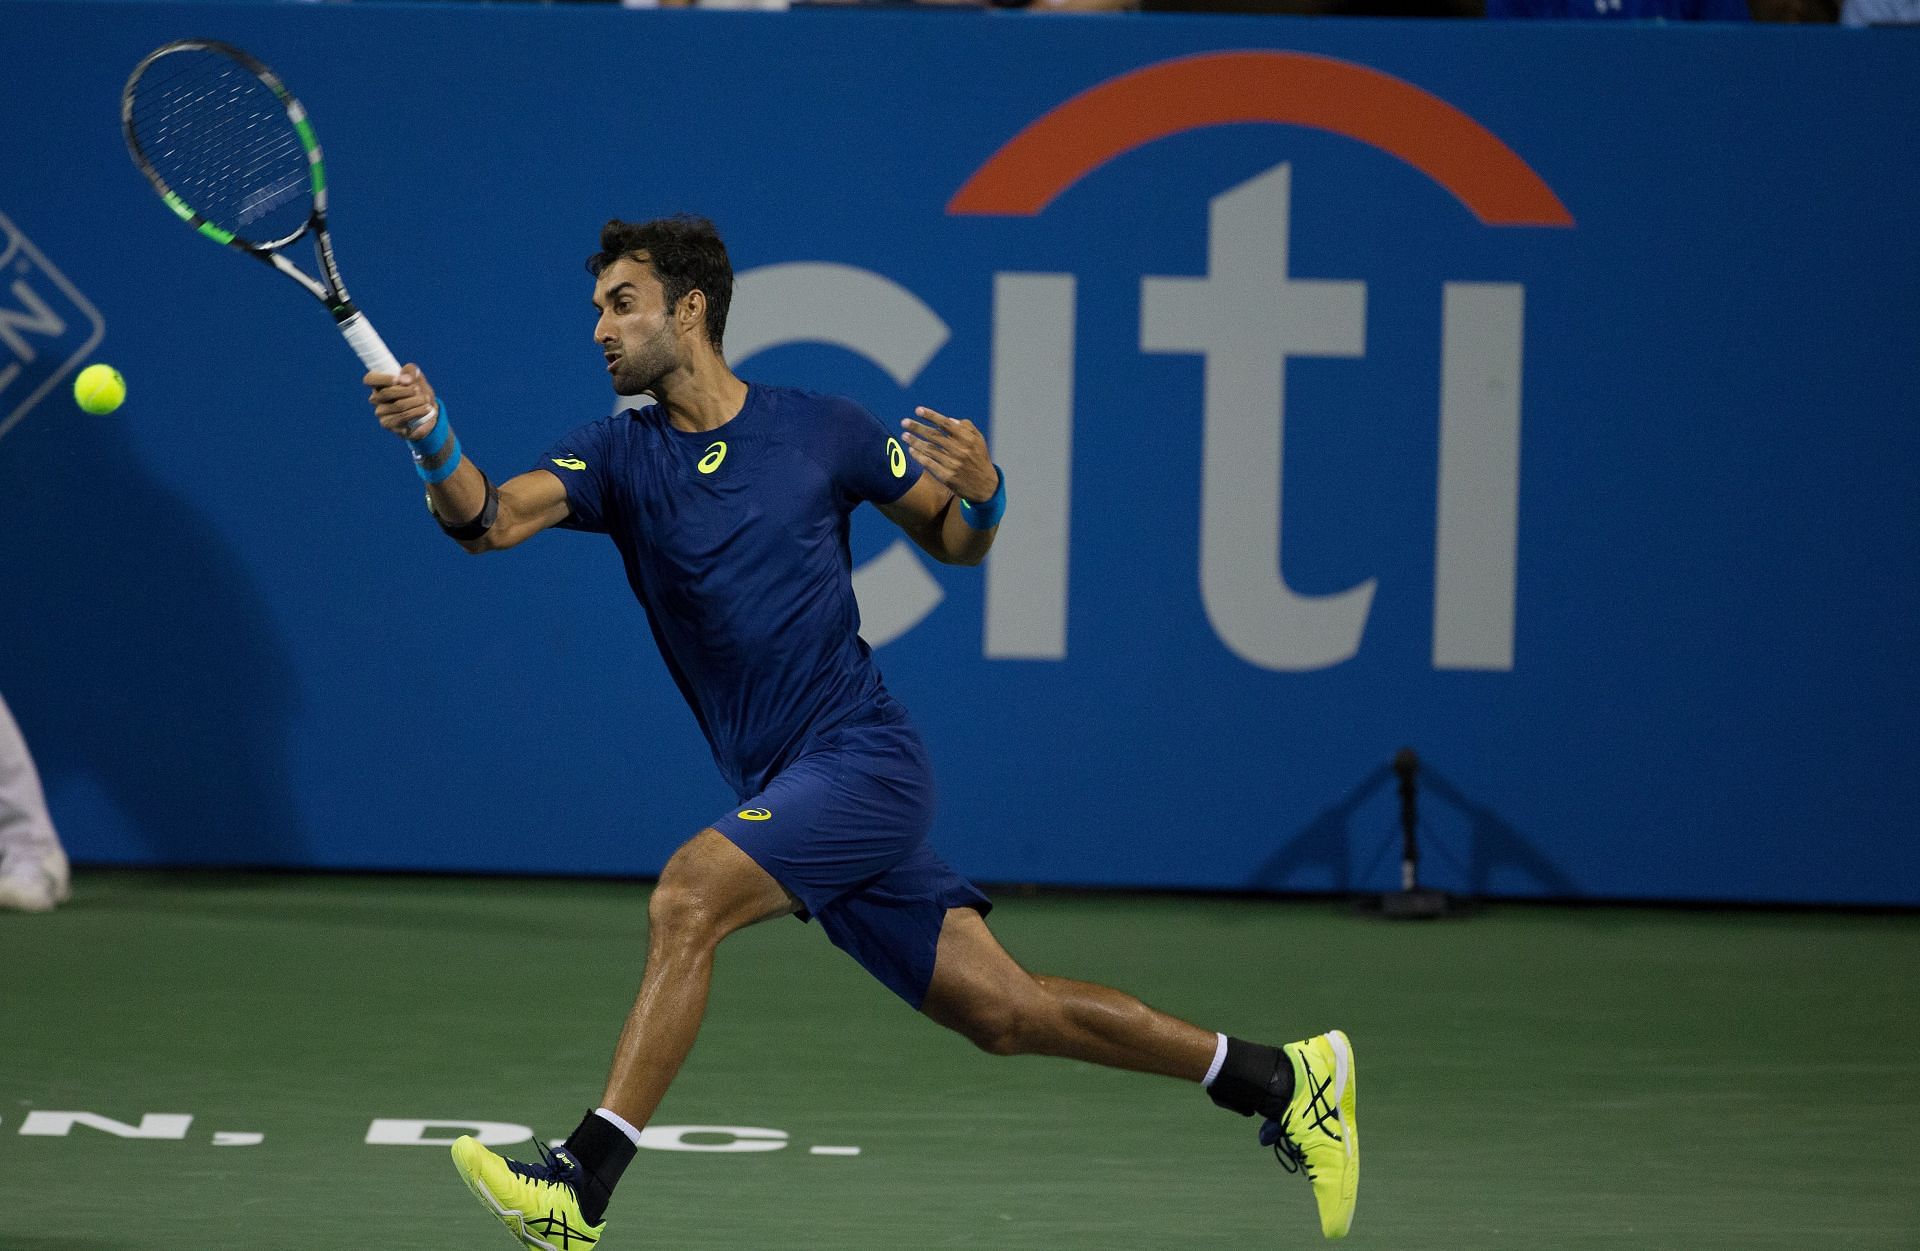 When was the last time Yuki Bhambri competed in the Mubadala Citi Open?